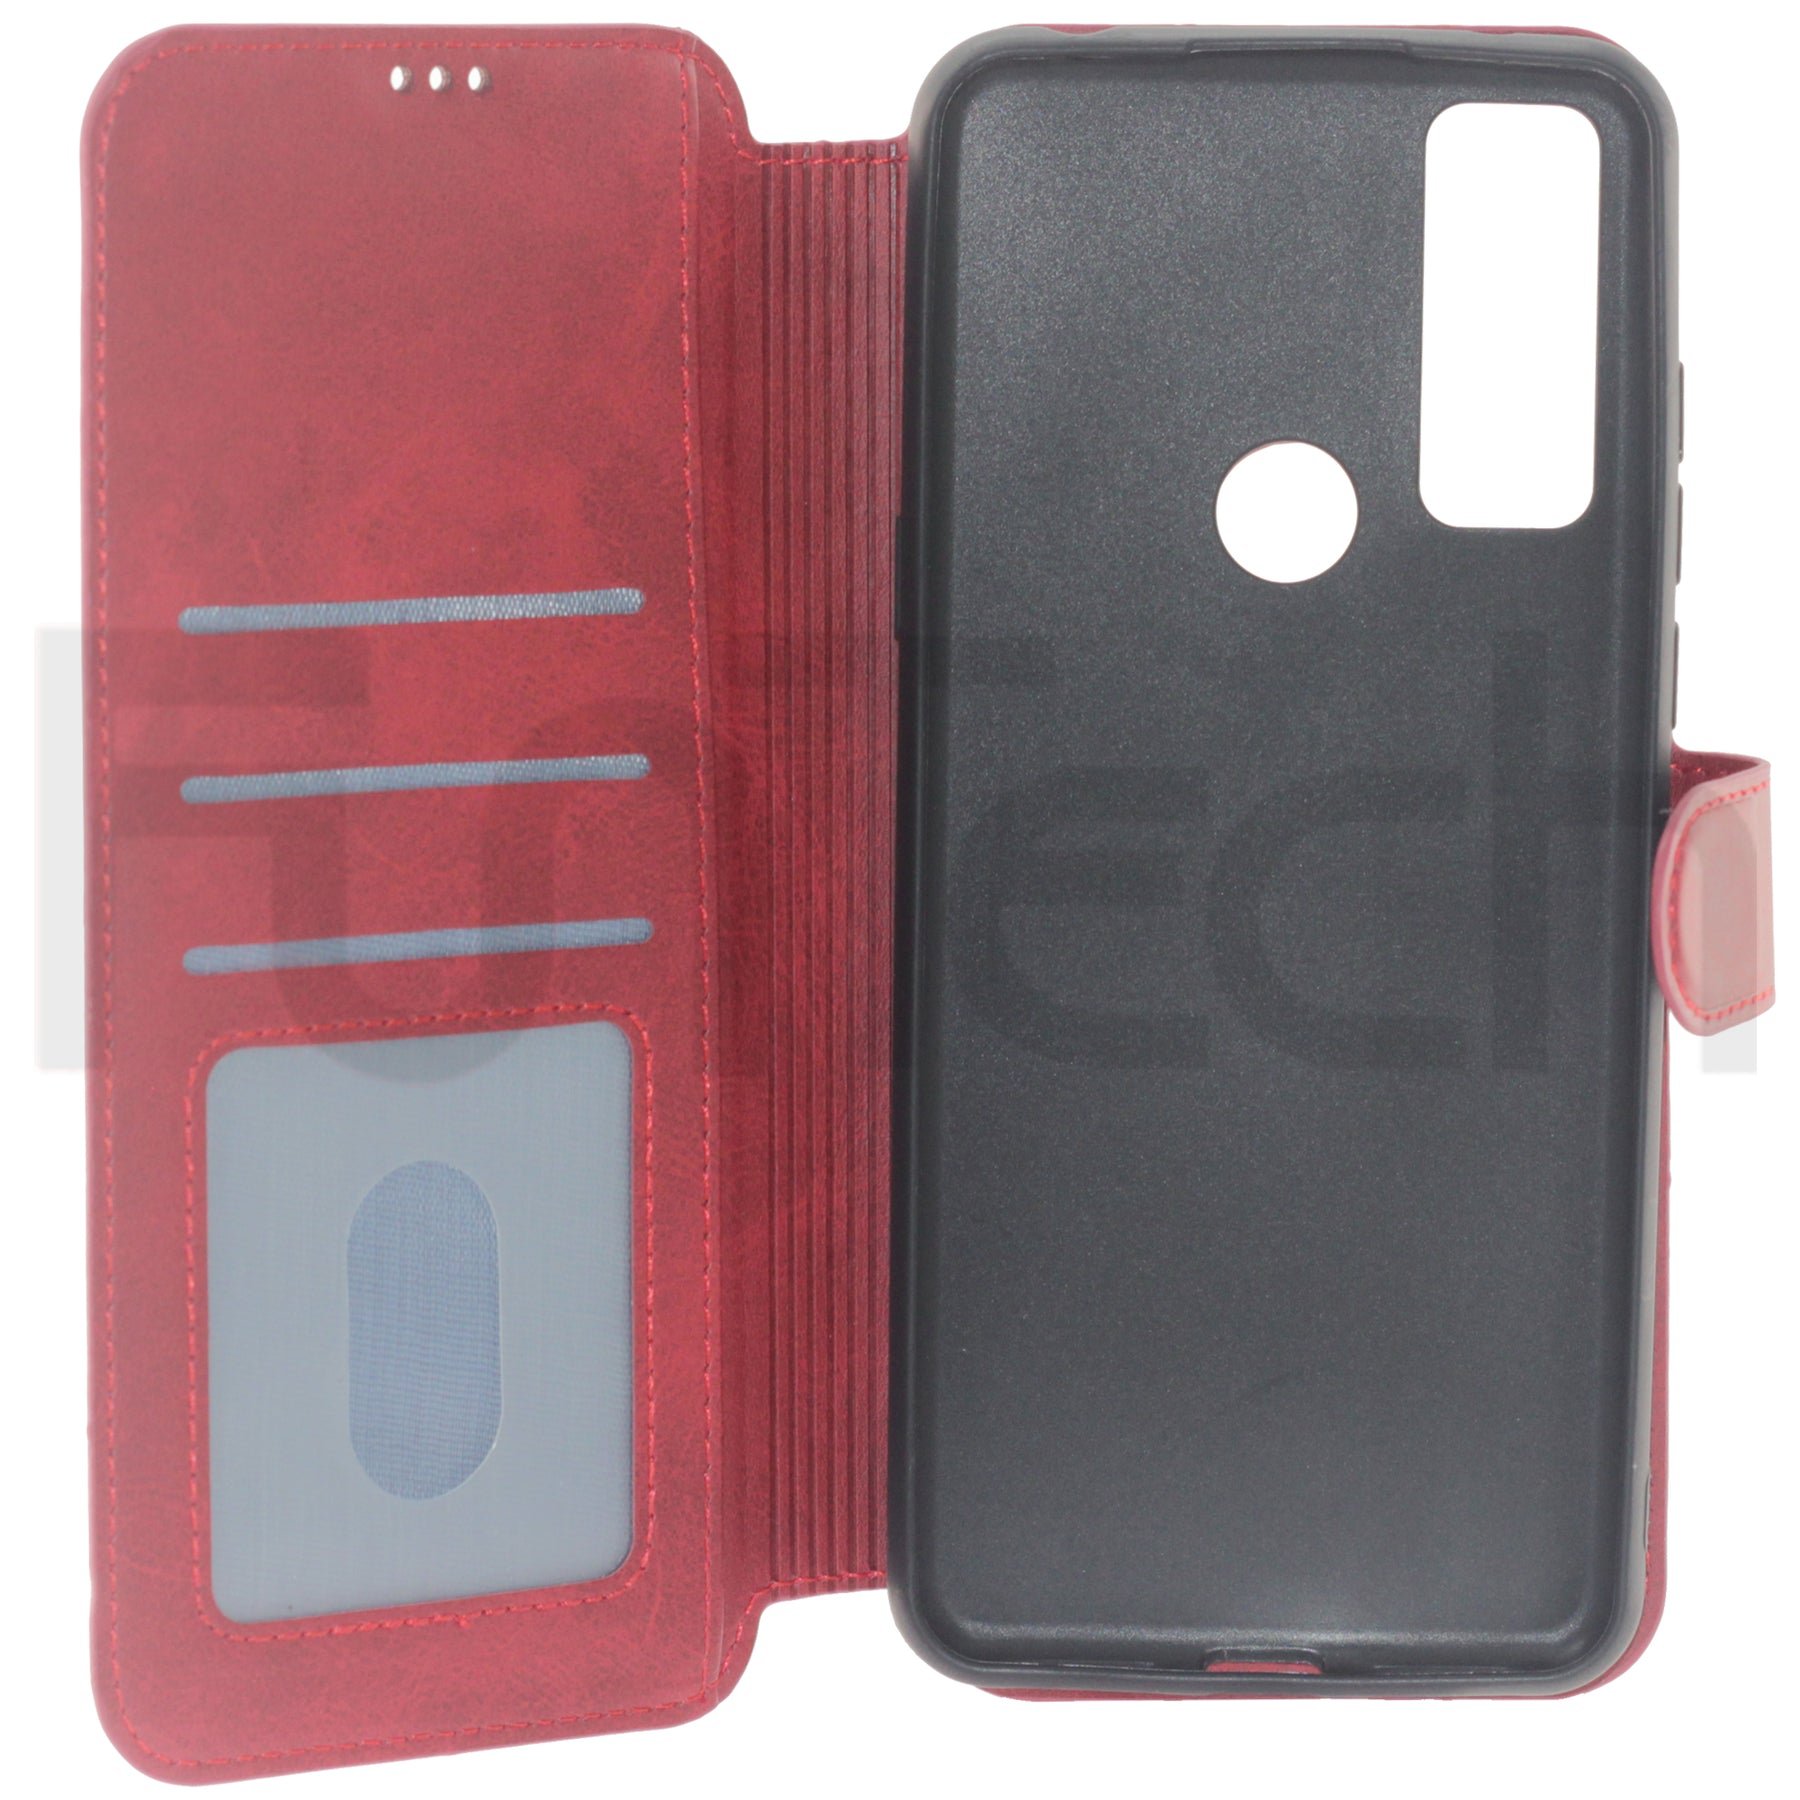 TCL, R20, Case, Color Red.